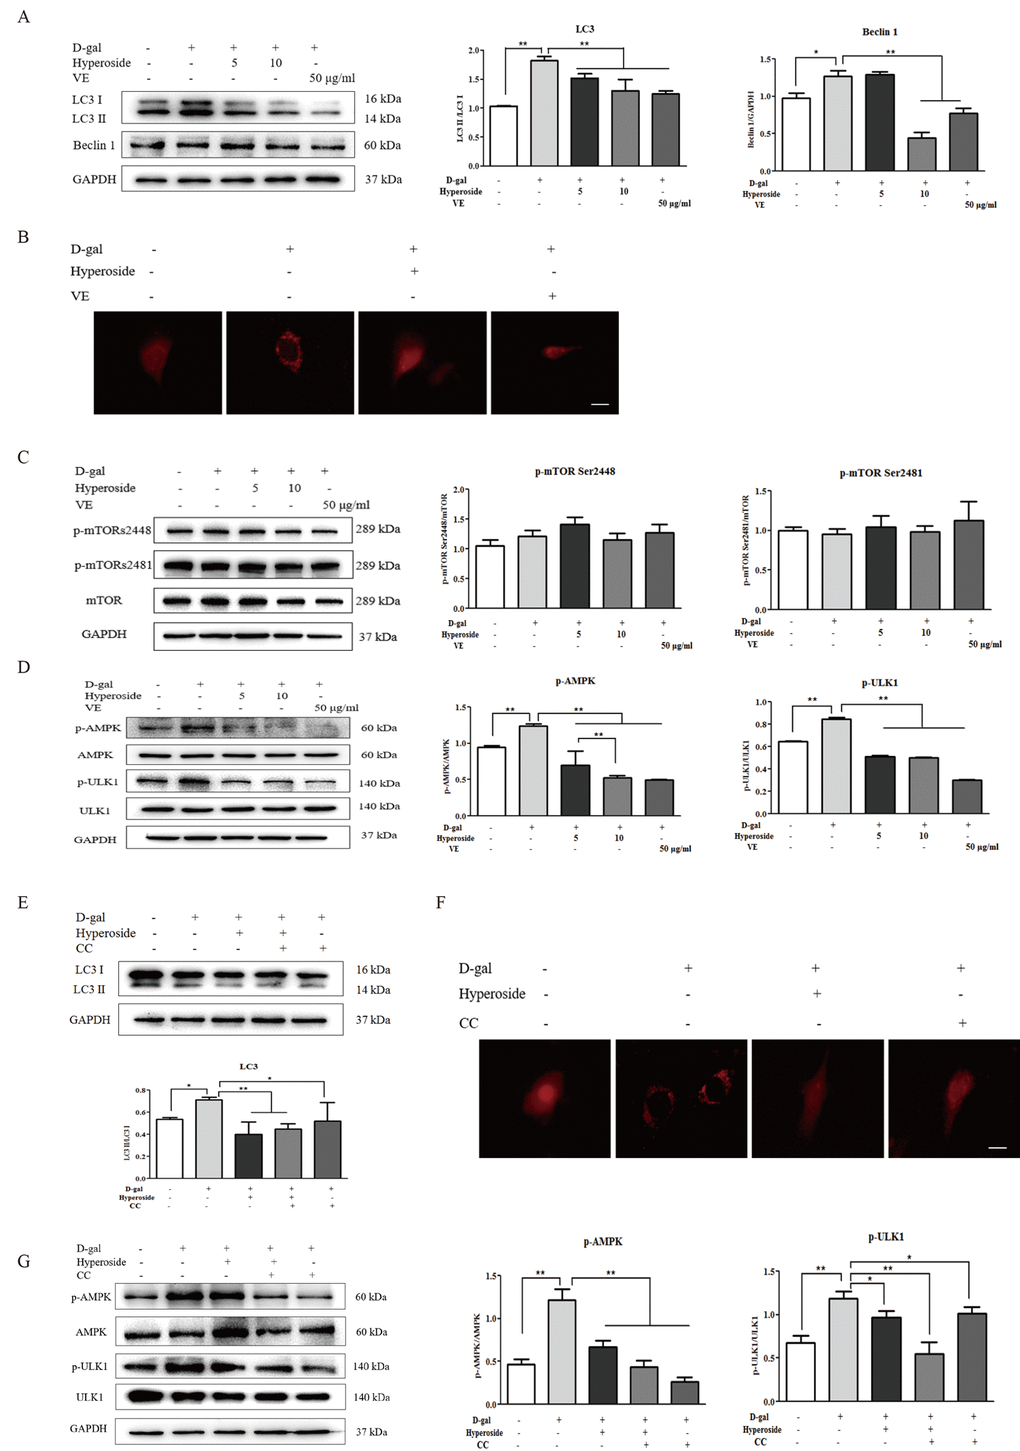 The effects of hyperoside and vitamin E on autophagic activity and the mTOR-independent and AMPK-ULK1 signaling pathways in vitro. (A) The NRK-52E cells were exposed to D-gal at 100 mM, with or without the treatment of hyperoside at 5 and 10 μg/ml or VE at 50 μg/ml for 24 hours, and subjected to a WB analysis for LC3 I/II and Beclin1. (B) The NRK-52E cells were infected with the RFP-LC3 Lentiviral Biosensor, exposed to D-gal at 100 mM with or without the treatment of hyperoside at 10 μg/ml or VE at 50 μg/ml for 24 hours and subjected to fluorescence microscopy. Scale bar = 5 μm. (C, D) The NRK-52E cells were exposed to D-gal at 100 mM with or without the treatment of hyperoside at 5 and 10 μg/ml or VE at 50 μg/ml for 24 hours, and subjected to a WB analysis for p-mTOR (Ser2448), p-mTOR (Ser2481) and mTOR (C1), as well as p-AMPK, AMPK, p-ULK1 and ULK1. (E) The NRK-52E cells were exposed to D-gal at 100 mM with or without the treatment of hyperoside at 10 μg/ml and CC at 10 μM for 24 hours, and subjected to a WB analysis for LC3 I/II. (F) The NRK-52E cells were infected with the RFP-LC3 Lentiviral Biosensor, exposed to D-gal at 100 mM with or without the treatment of hyperoside at 10 μg/ml and CC at 10 μM for 24 hours and subjected to fluorescence microscopy. Scale bar = 5 μm. (G) The NRK-52E cells were exposed to D-gal at 100 mM with or without the treatment of hyperoside at 10 μg/ml and CC at 10 μM for 24 hours, and subjected to a WB analysis for p-AMPK, AMPK, p-ULK1 and ULK1. The data are expressed as the mean ± SD, (n=3), *P **P 